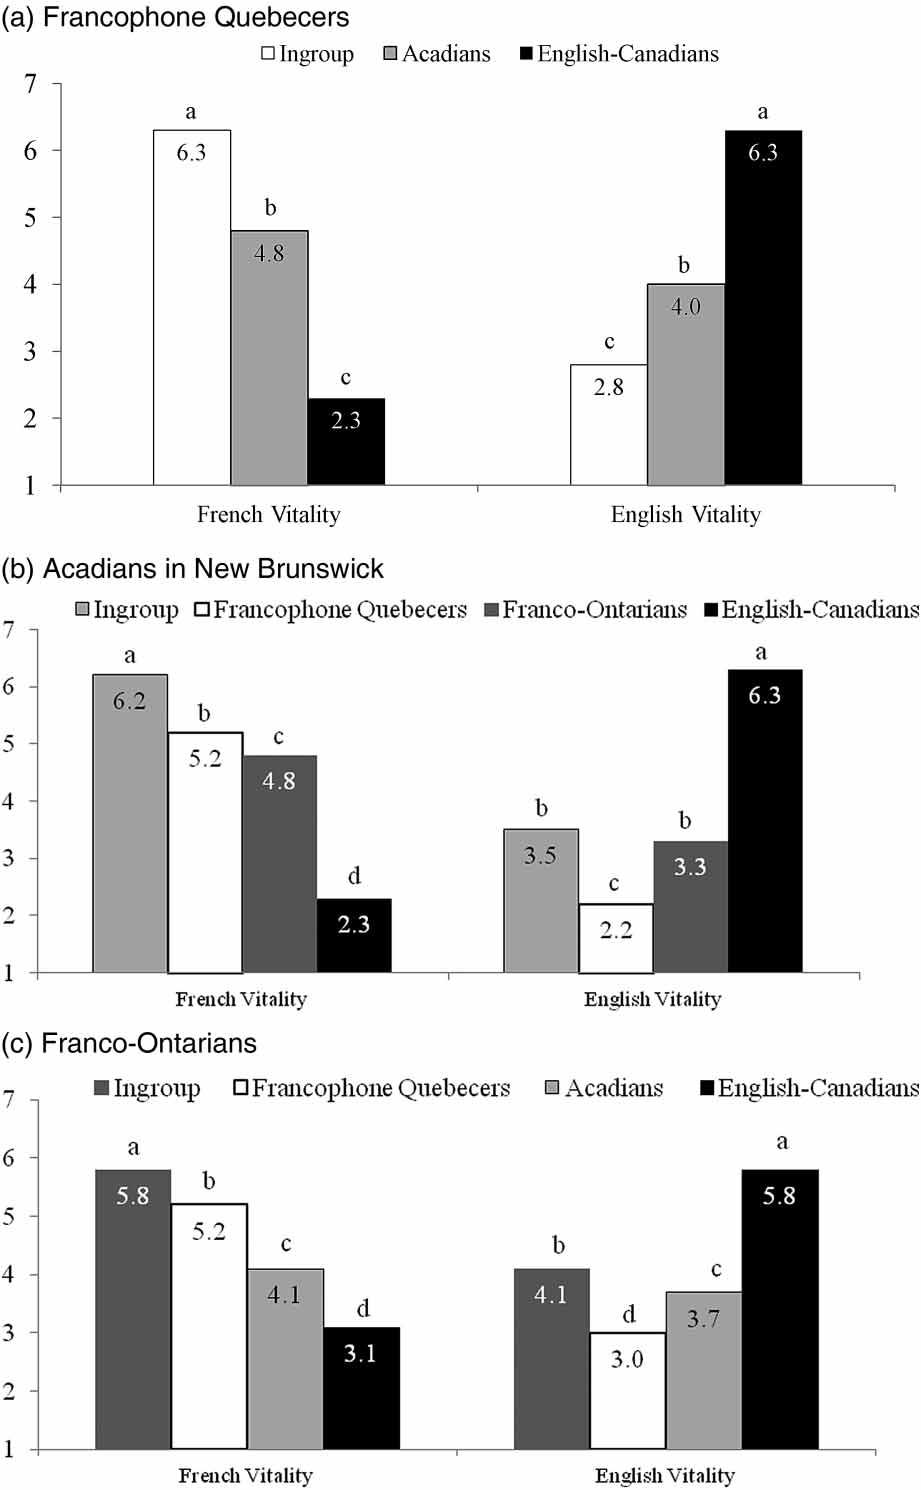 JOURNAL OF MULTILINGUAL AND MULTICULTURAL DEVELOPMENT 11 Figure 1. Perception of contribution of ingroup and FC/EC migrants to French/English vitality. (a) Francophone Quebecers (n = 204).